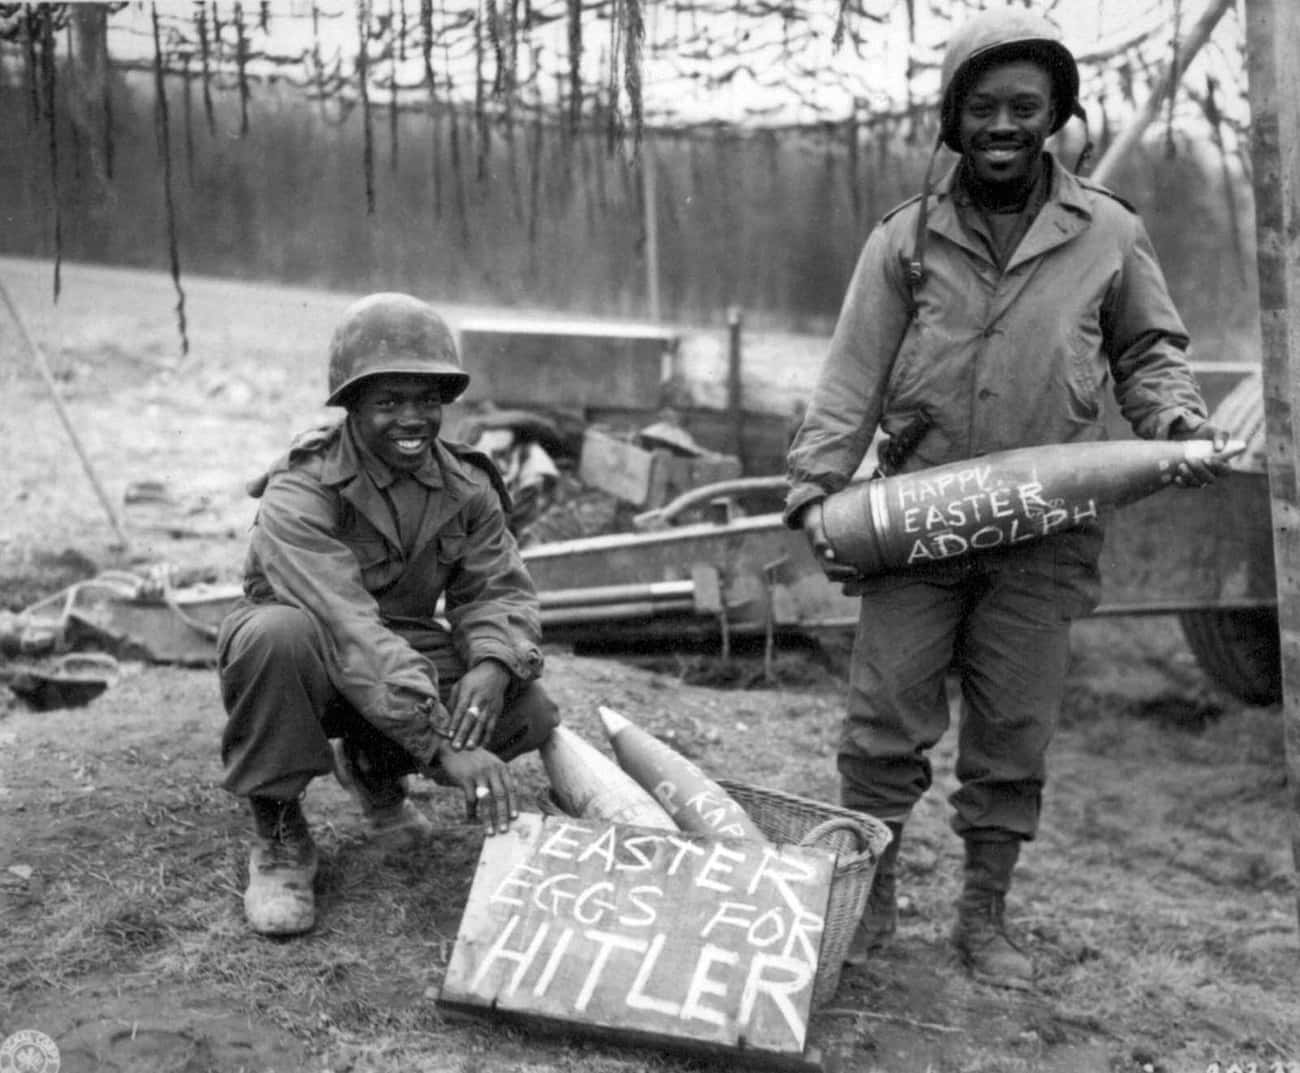 Two Soldiers With 'Easter Eggs'